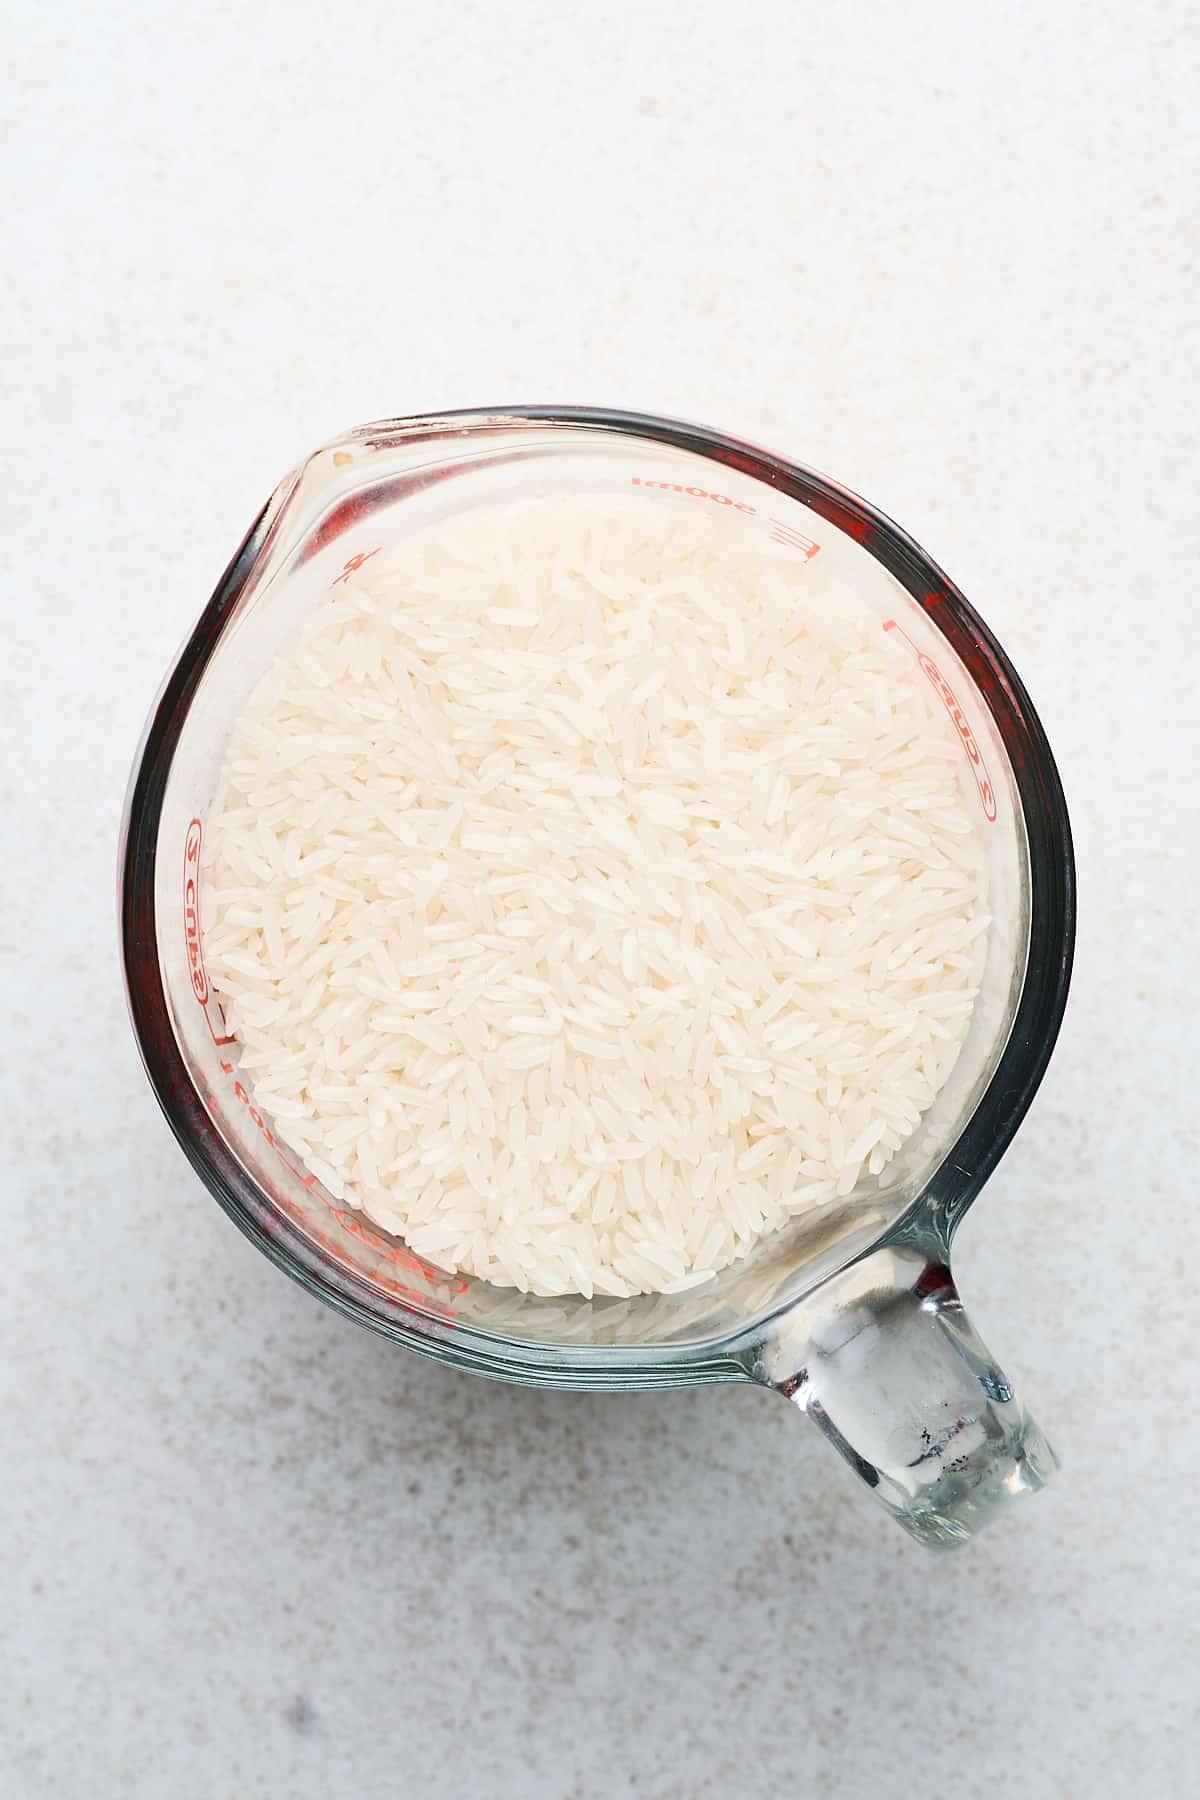 Jasmine rice in a measuring cup.